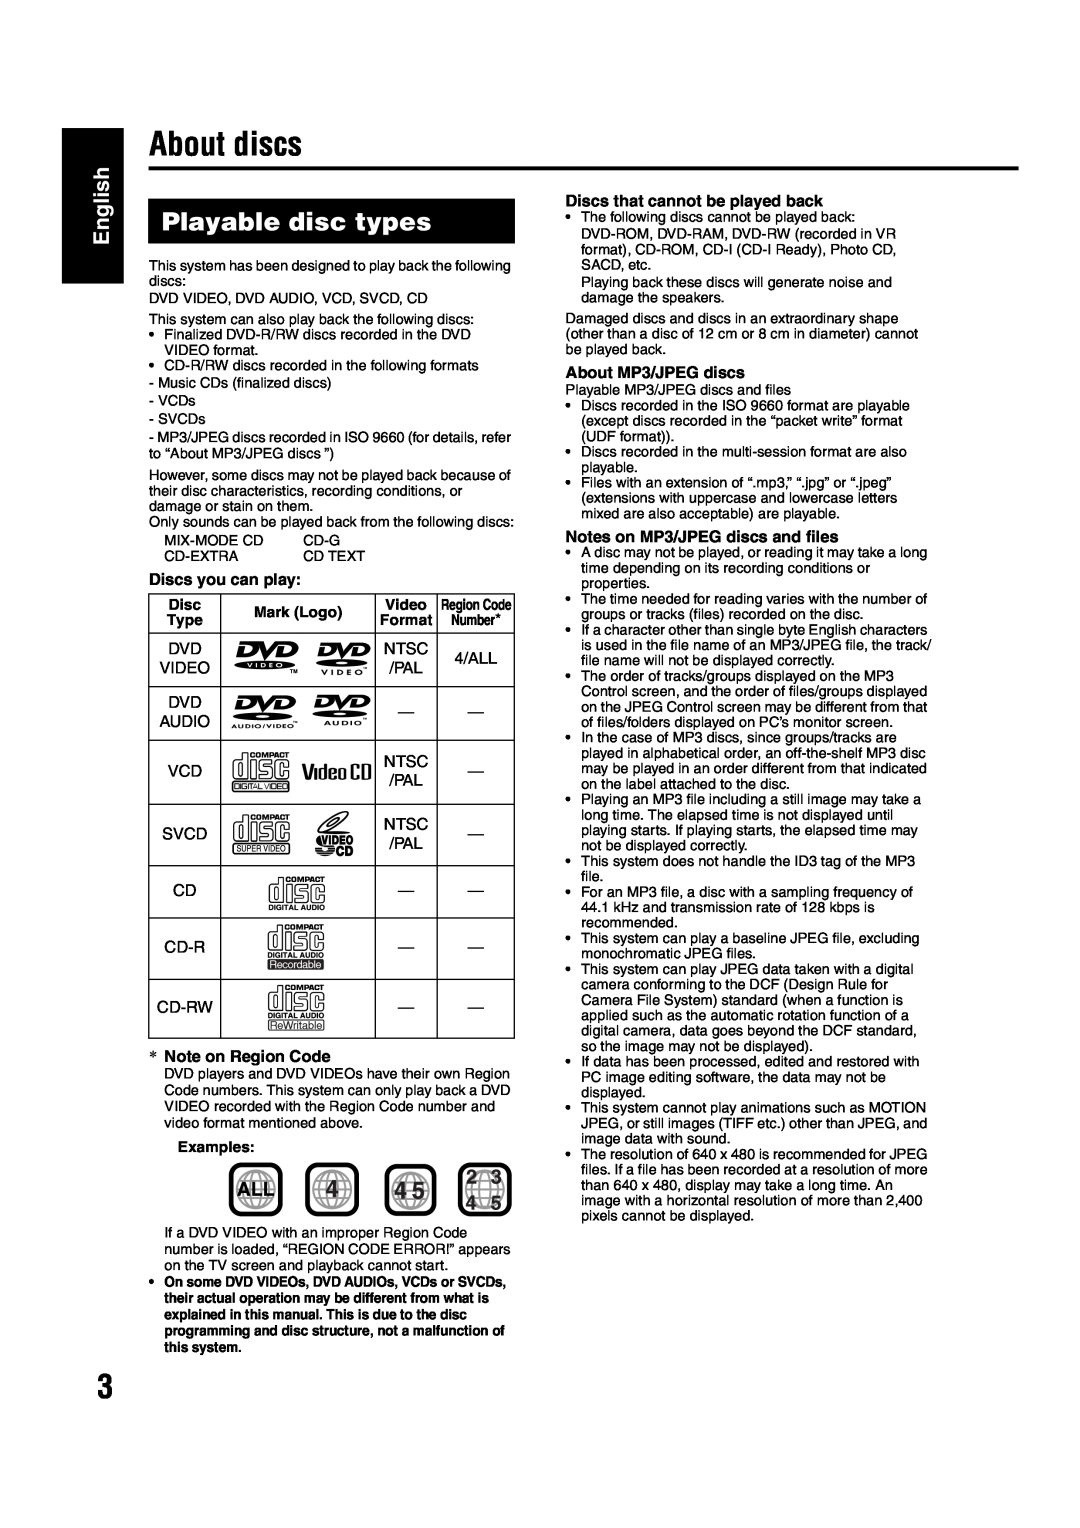 JVC EX-A1 manual About discs, Playable disc types, English, Discs you can play, Note on Region Code, About MP3/JPEG discs 